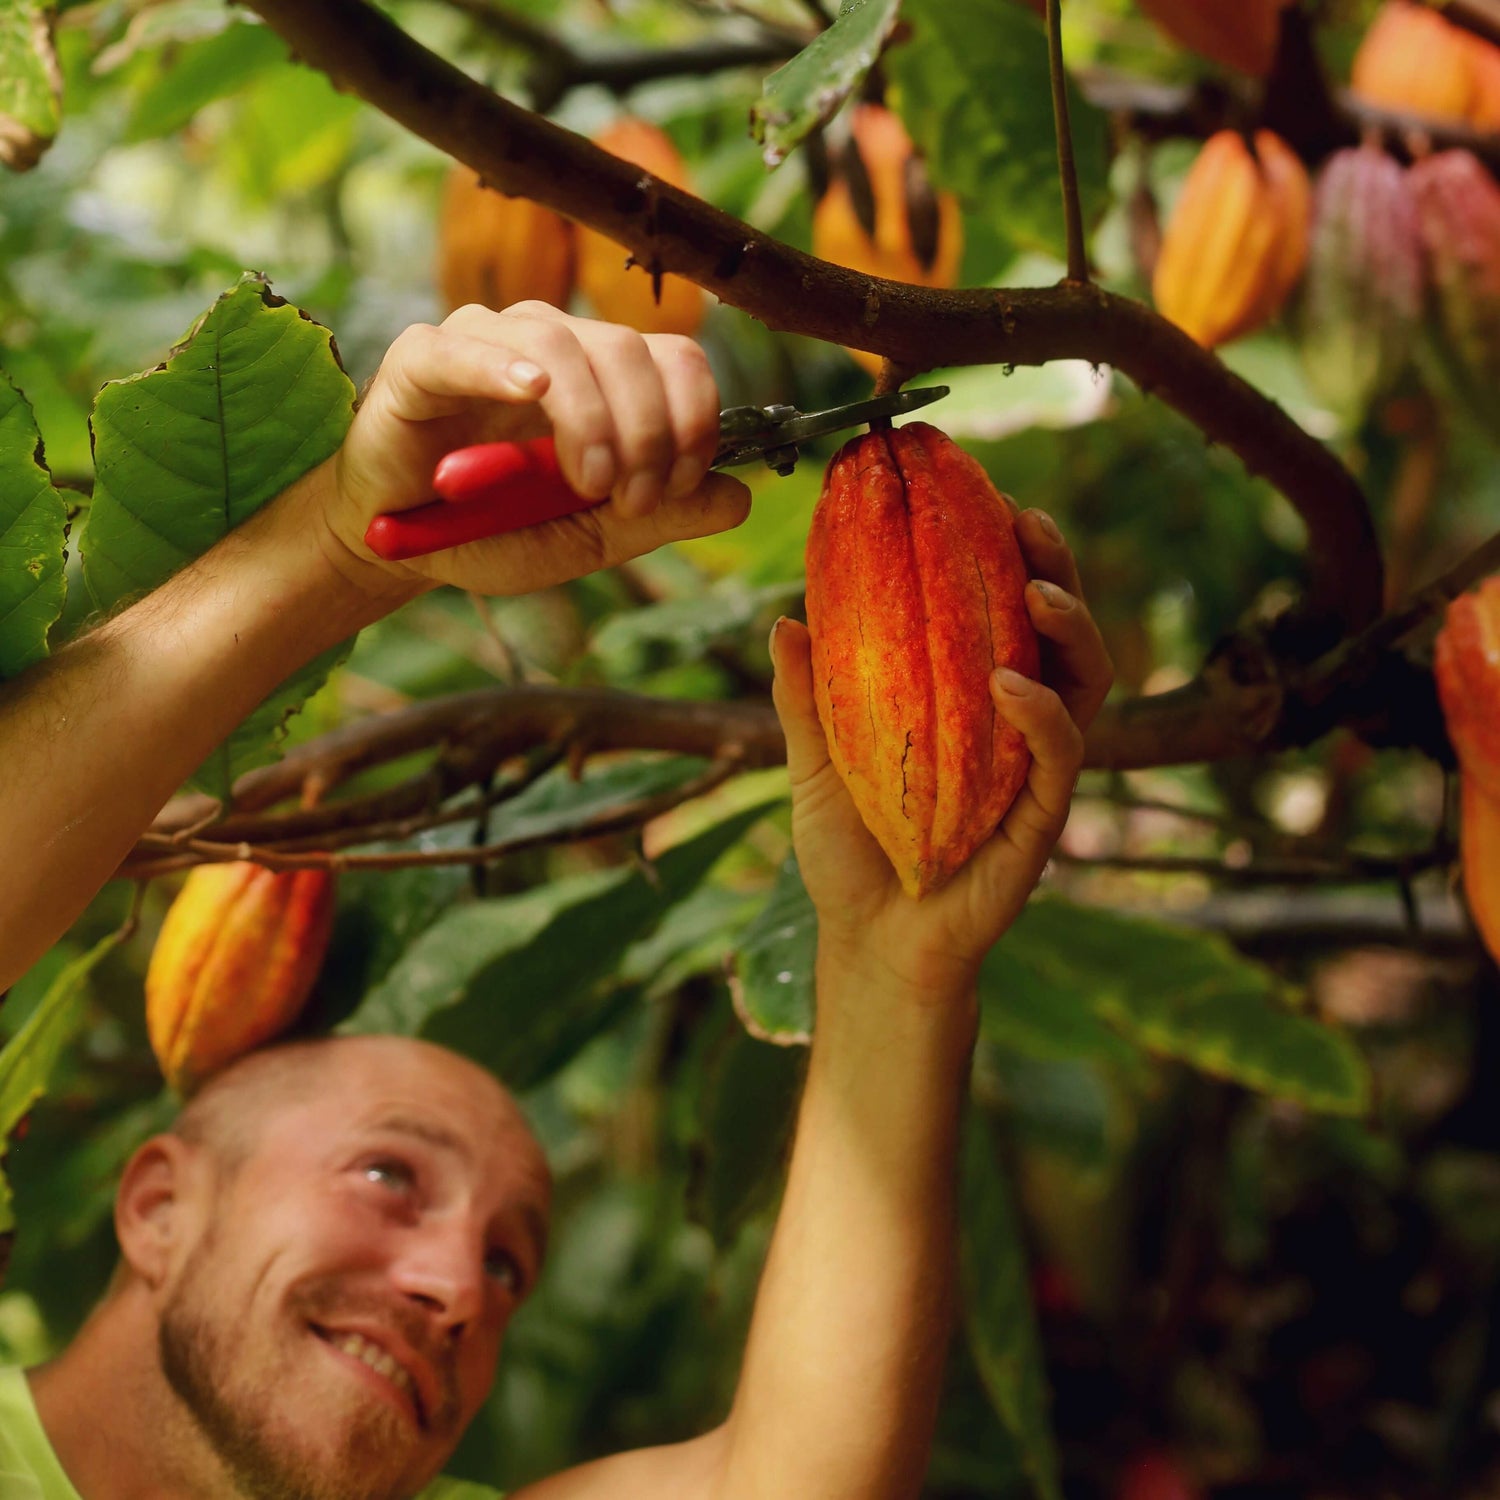 Man cutting cacao pod from tree